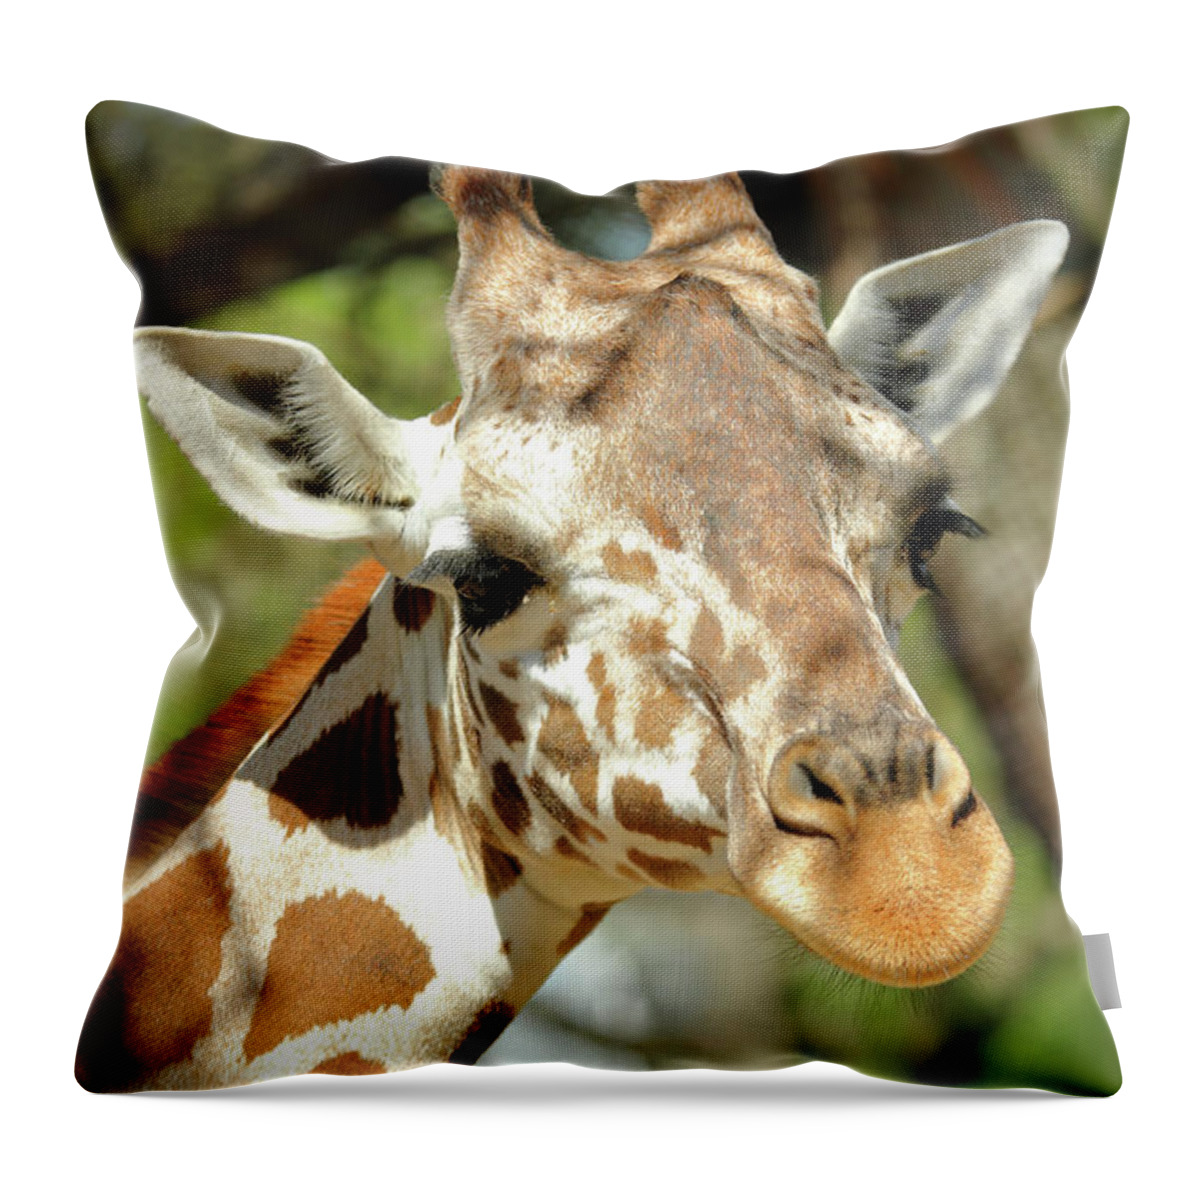 Animal Throw Pillow featuring the photograph Gentle Giant by Lens Art Photography By Larry Trager